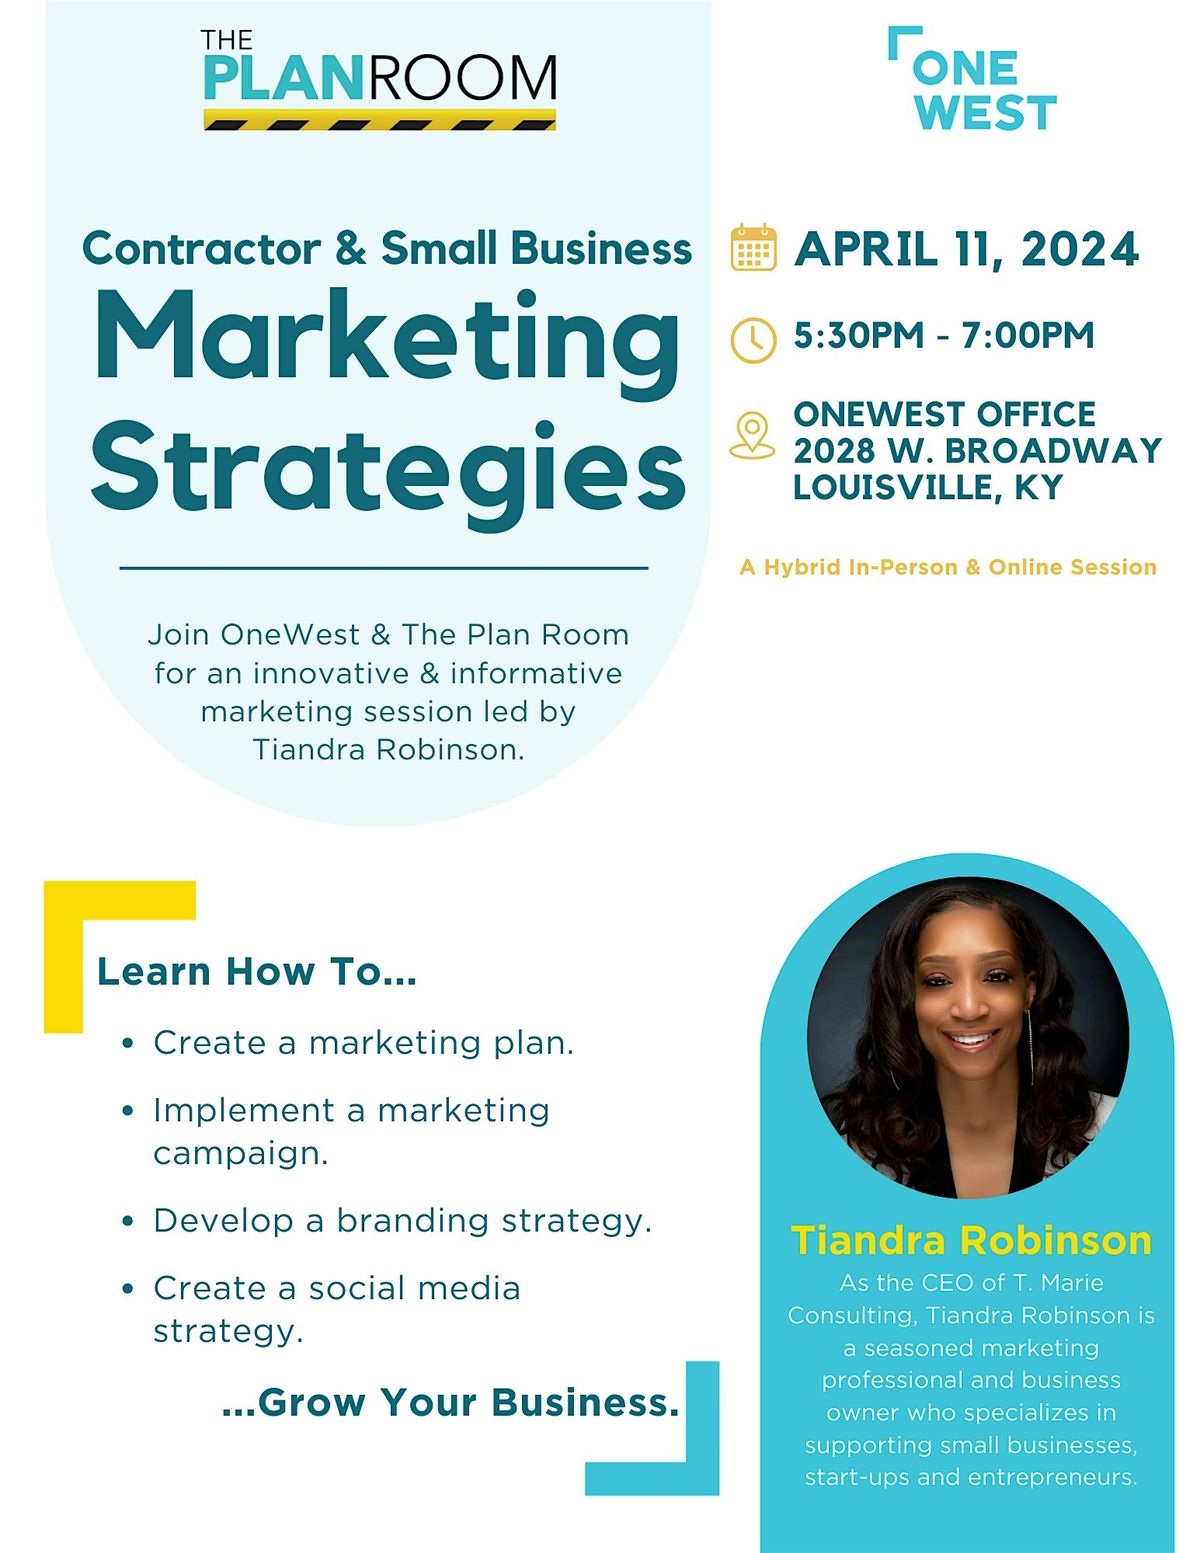 Marketing Strategies for Contractors & Small Businesses